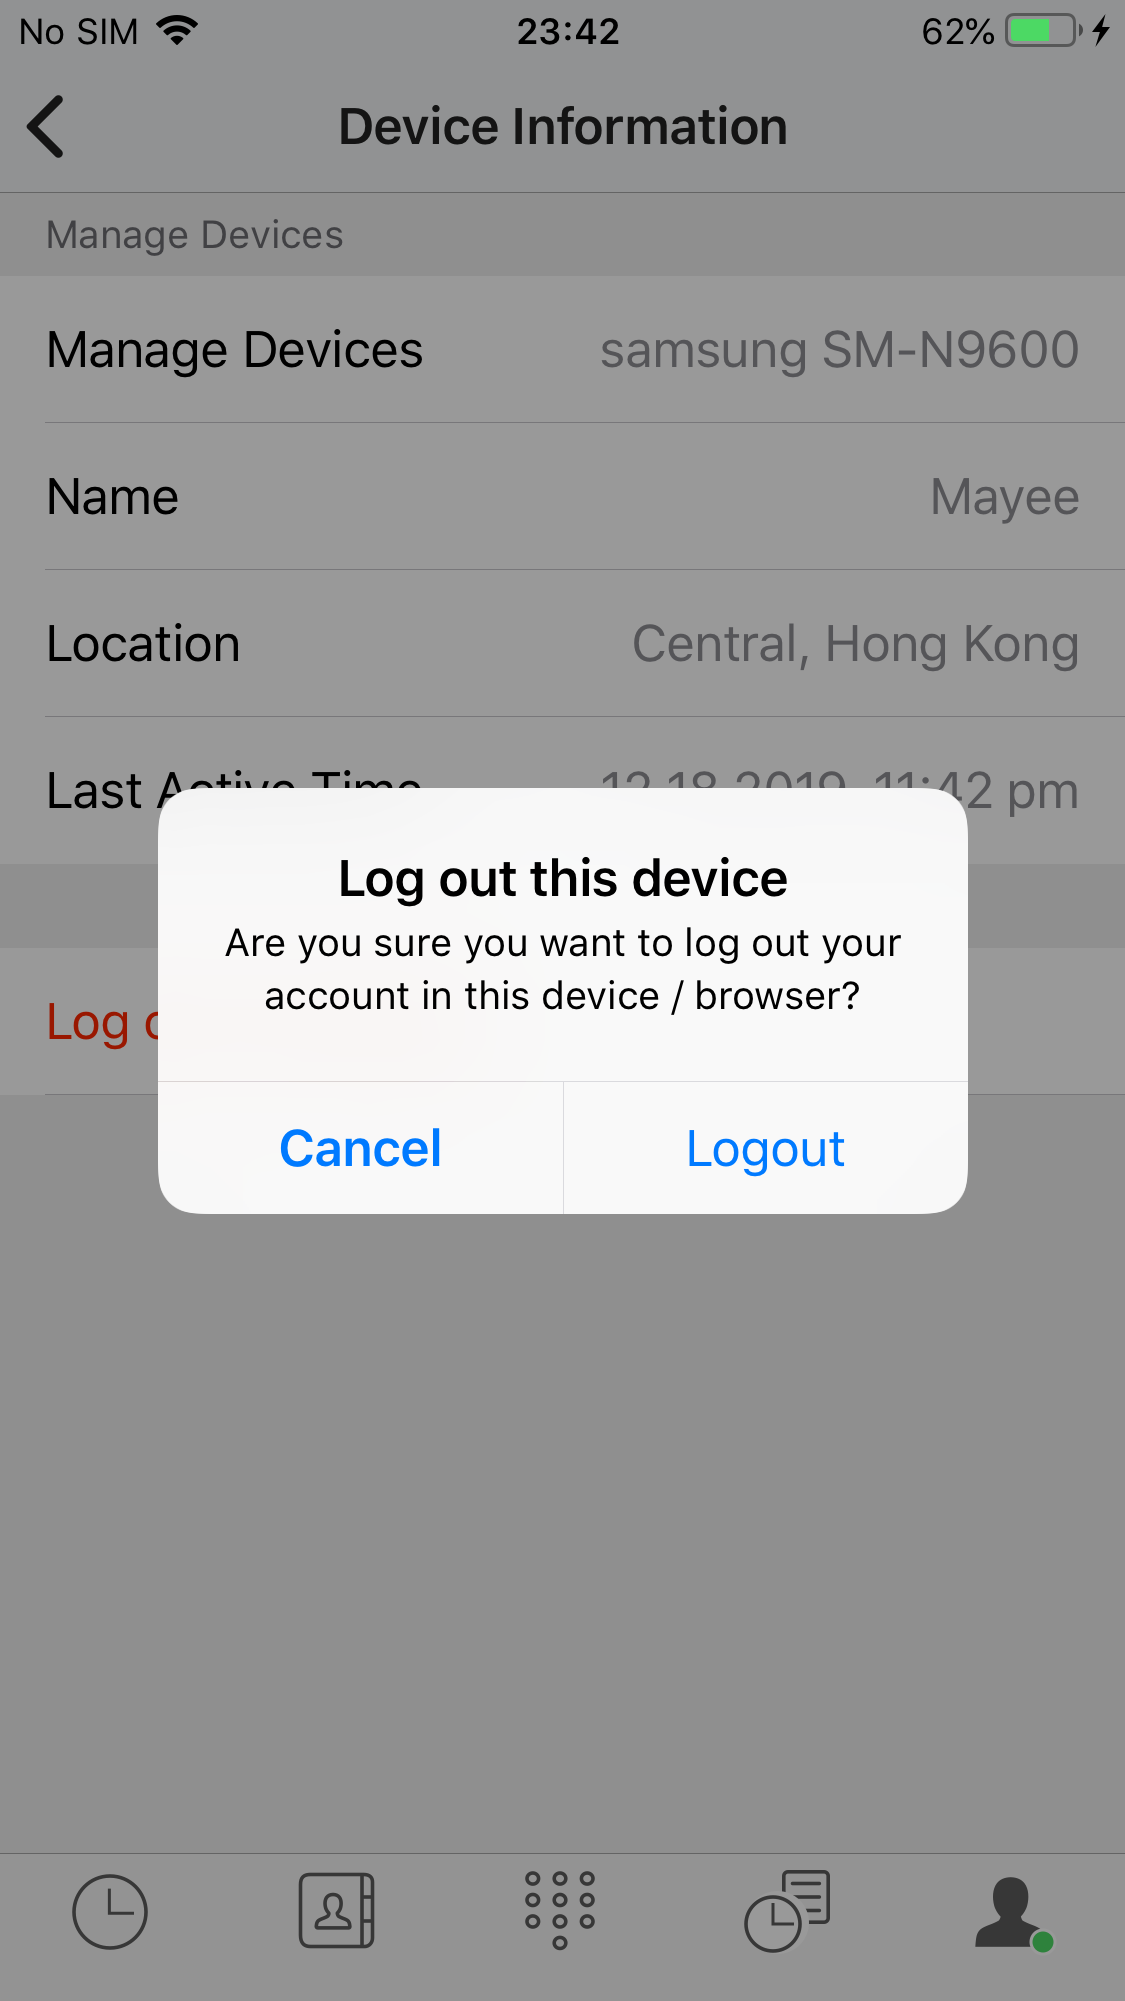 Log out one Device Confirmation